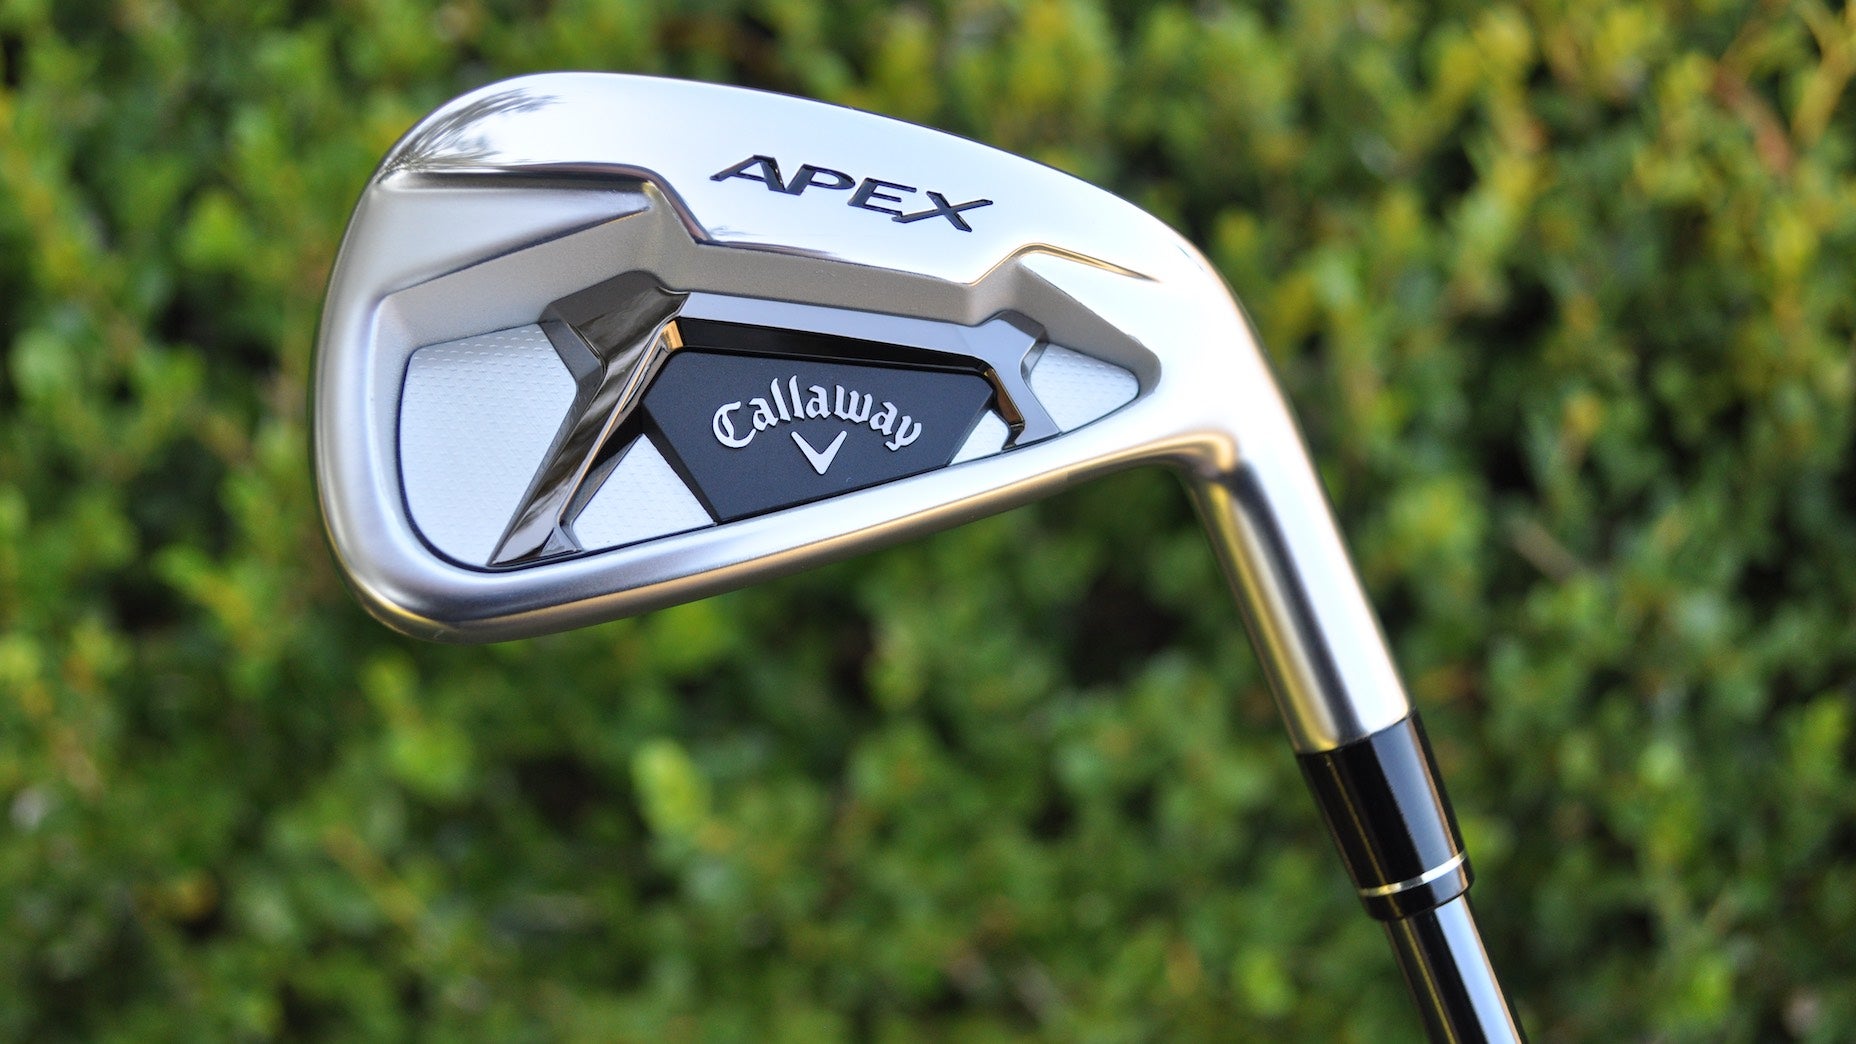 Callaway's Apex, Apex DCB and Apex Pro irons First Look